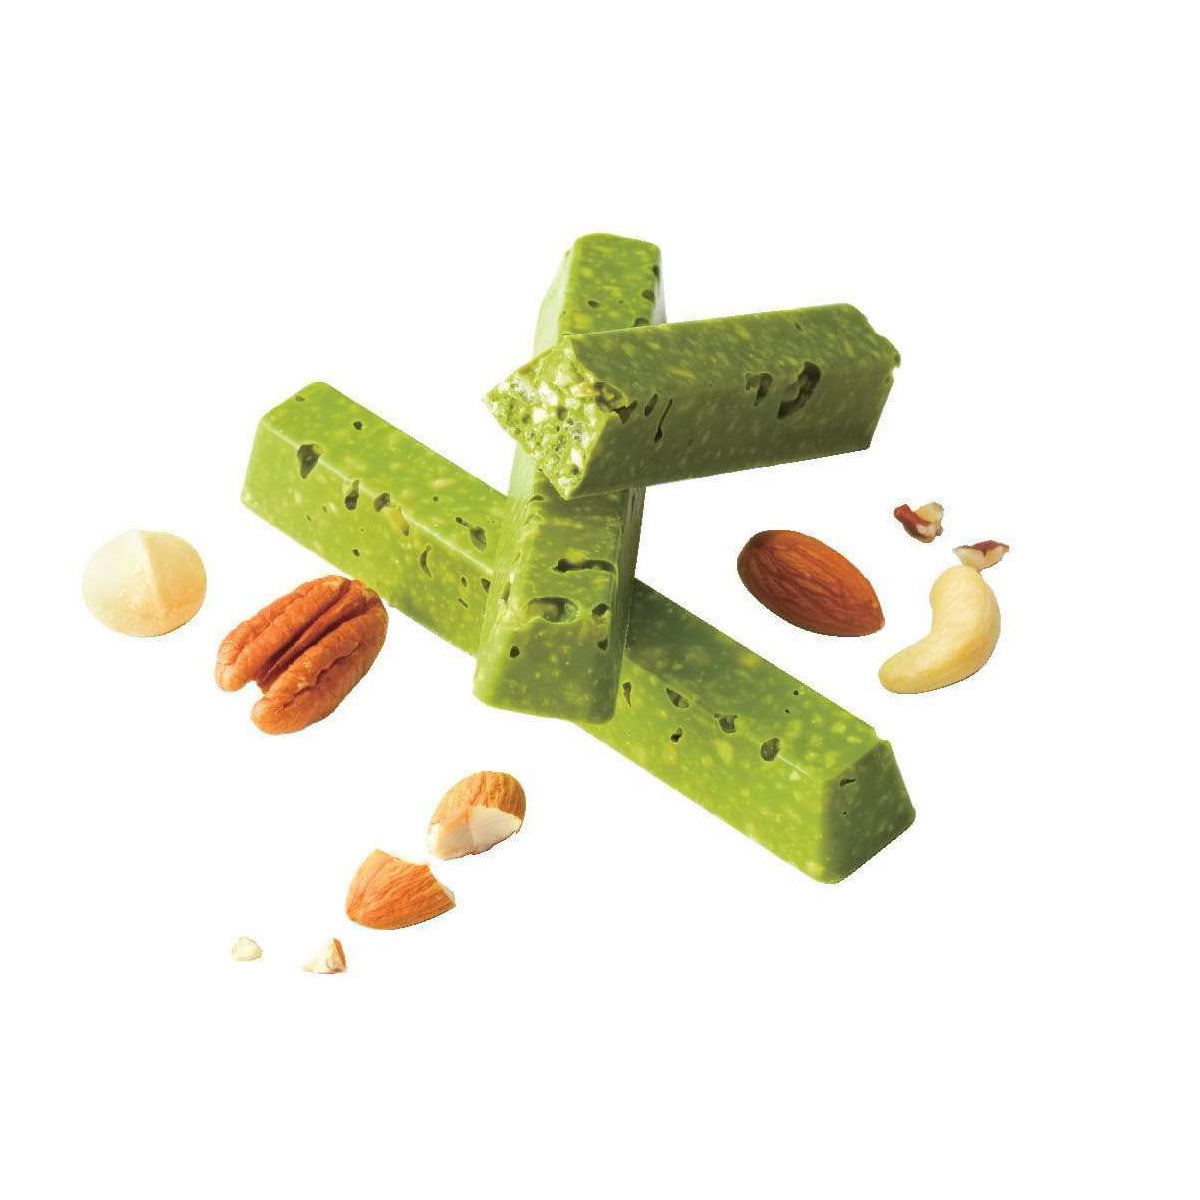 ROYCE' Chocolate - Matcha Bar Chocolate - Image shows green chocolate bars with accents of different nuts. Background is in white.